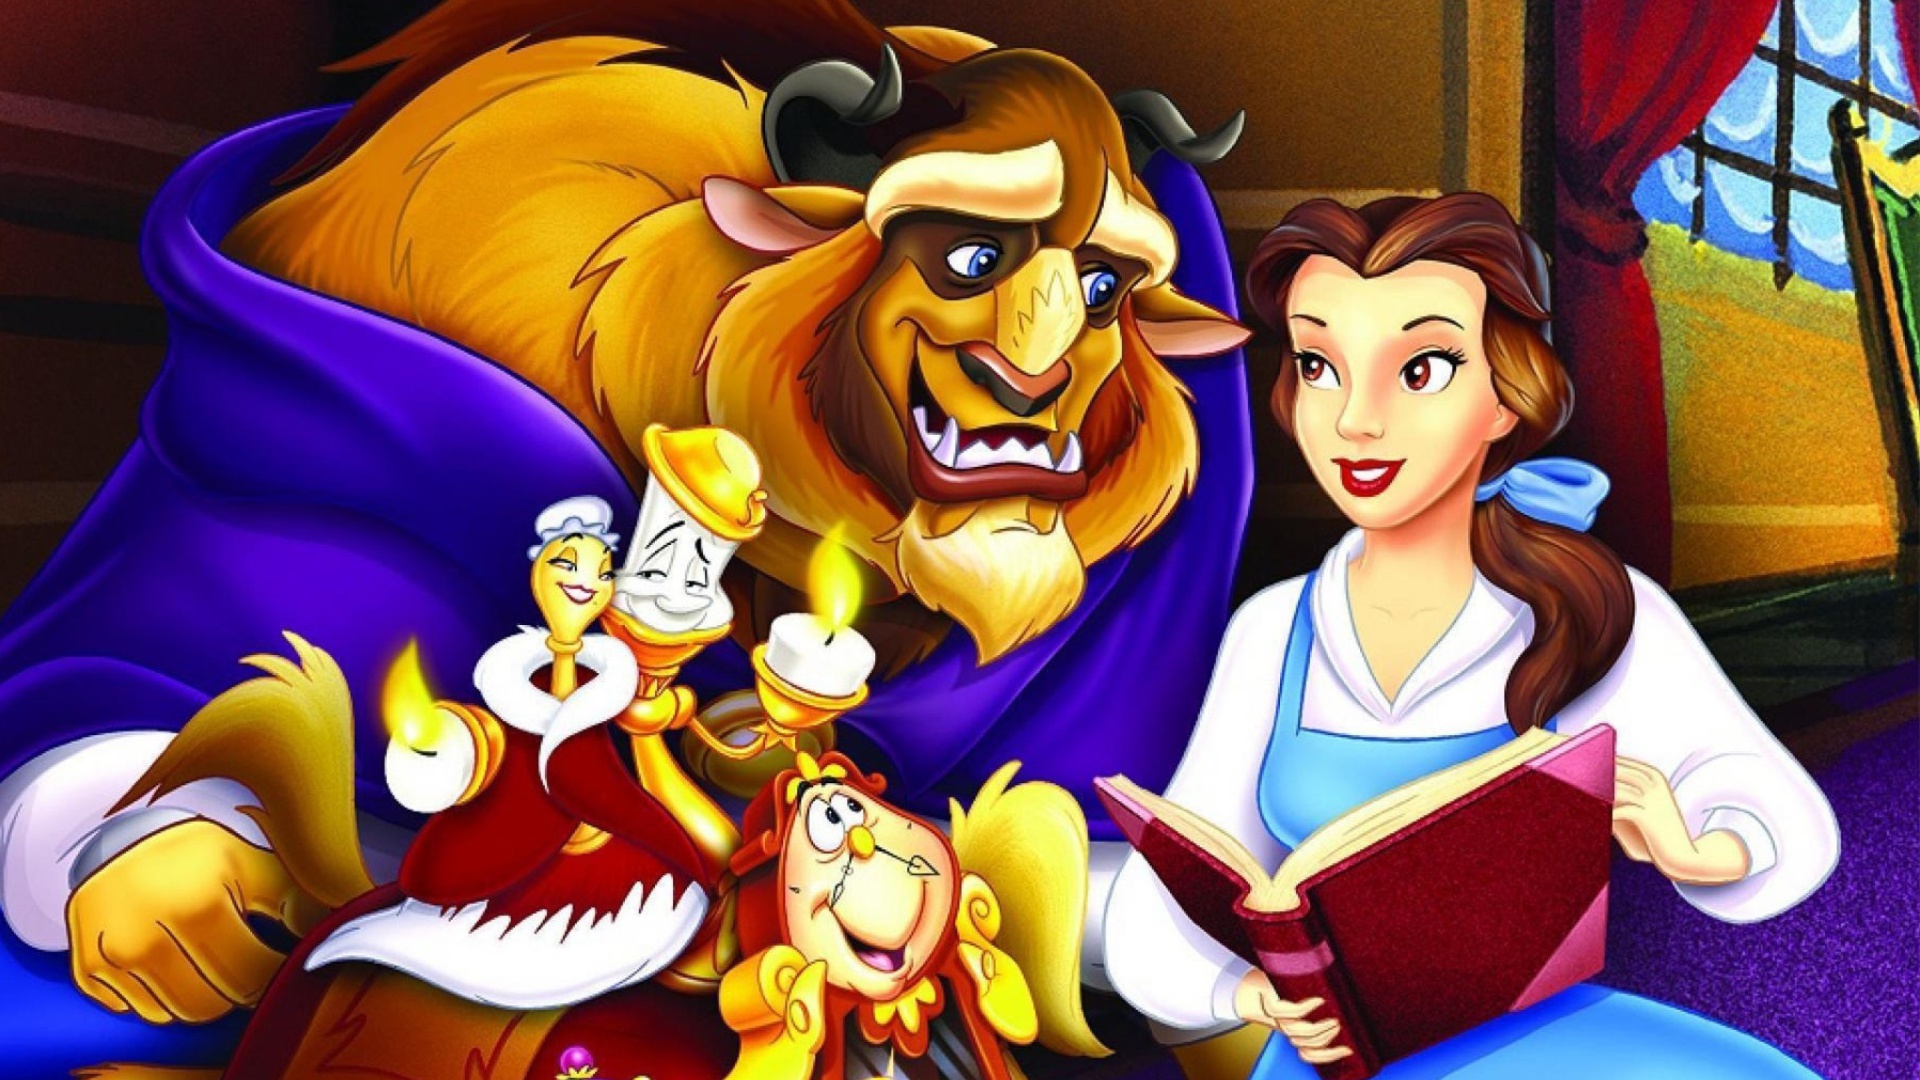 Beauty and the Beast with Friends wallpaper 1920x1080